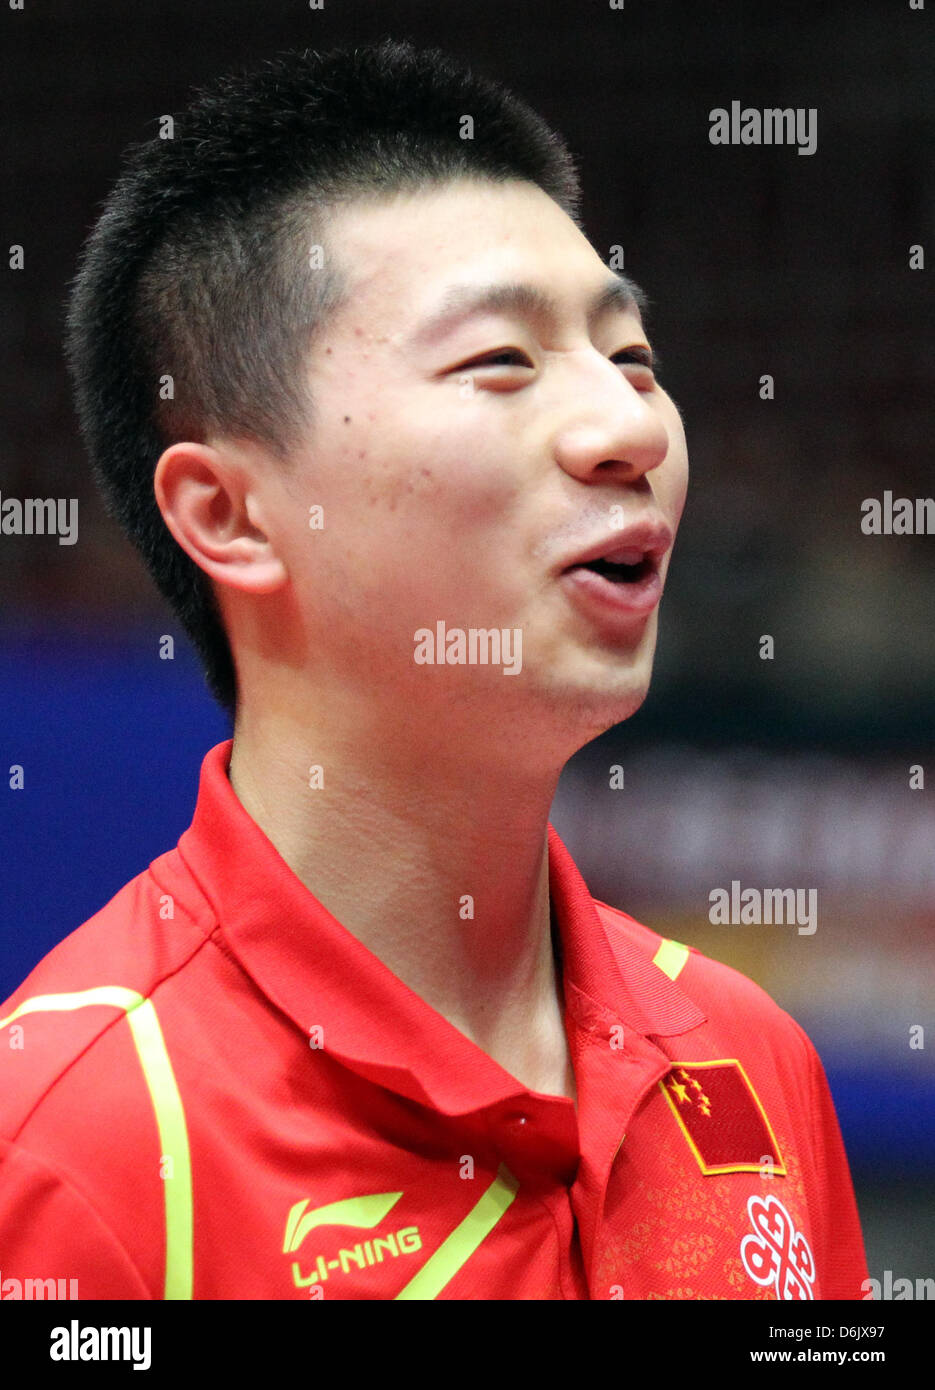 China's Long Ma smiles after winning the men's group A match against Slovenia's Lasan at the 2012 World Team Table Tennis Championships at Westfalenhalle in Dortmund, Germany, 28 March 2012. Photo: Friso Gentsch Stock Photo